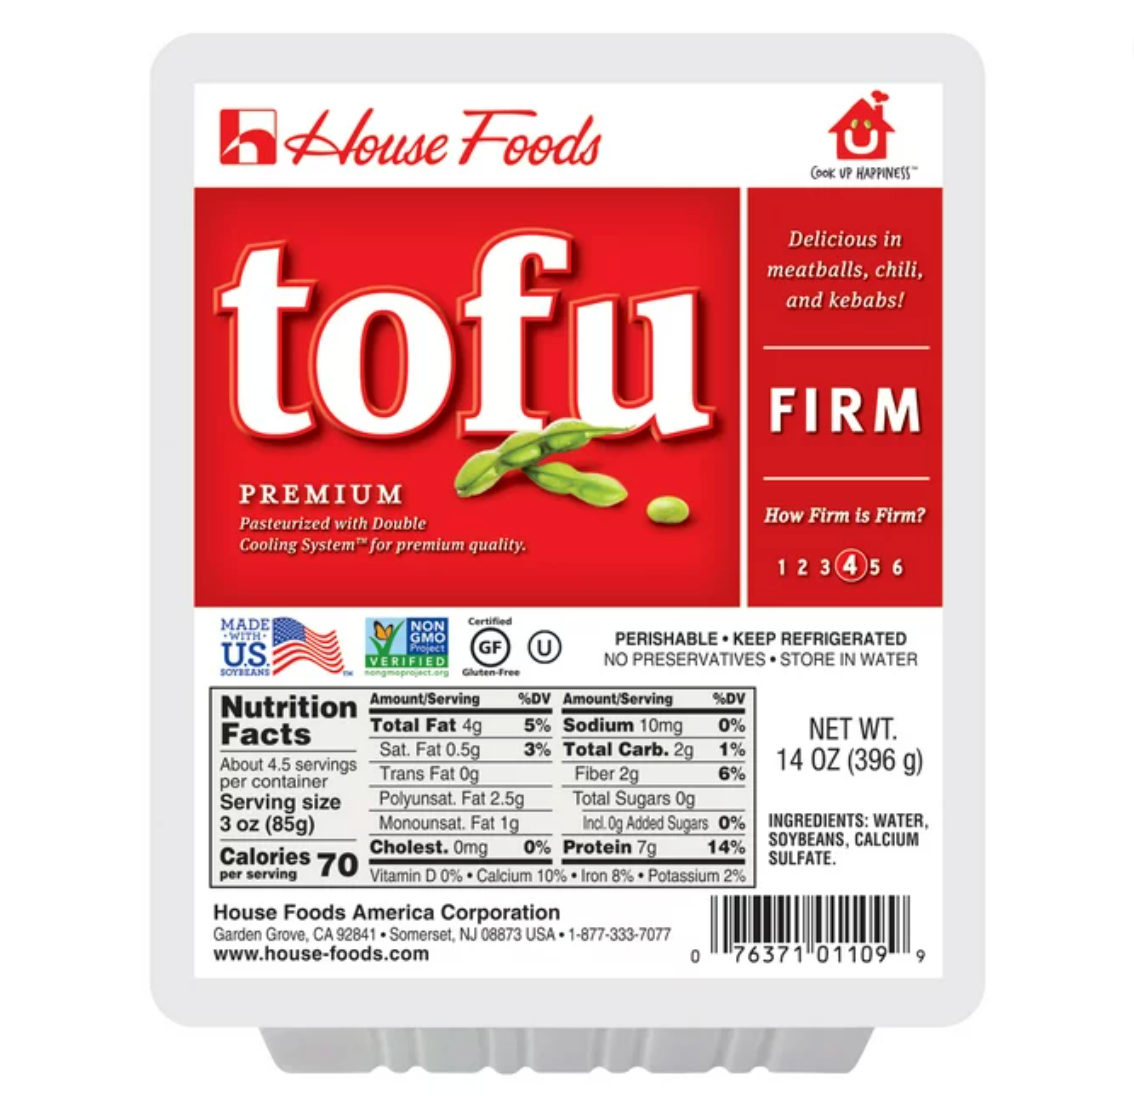 HSE TOFU FIRM RED